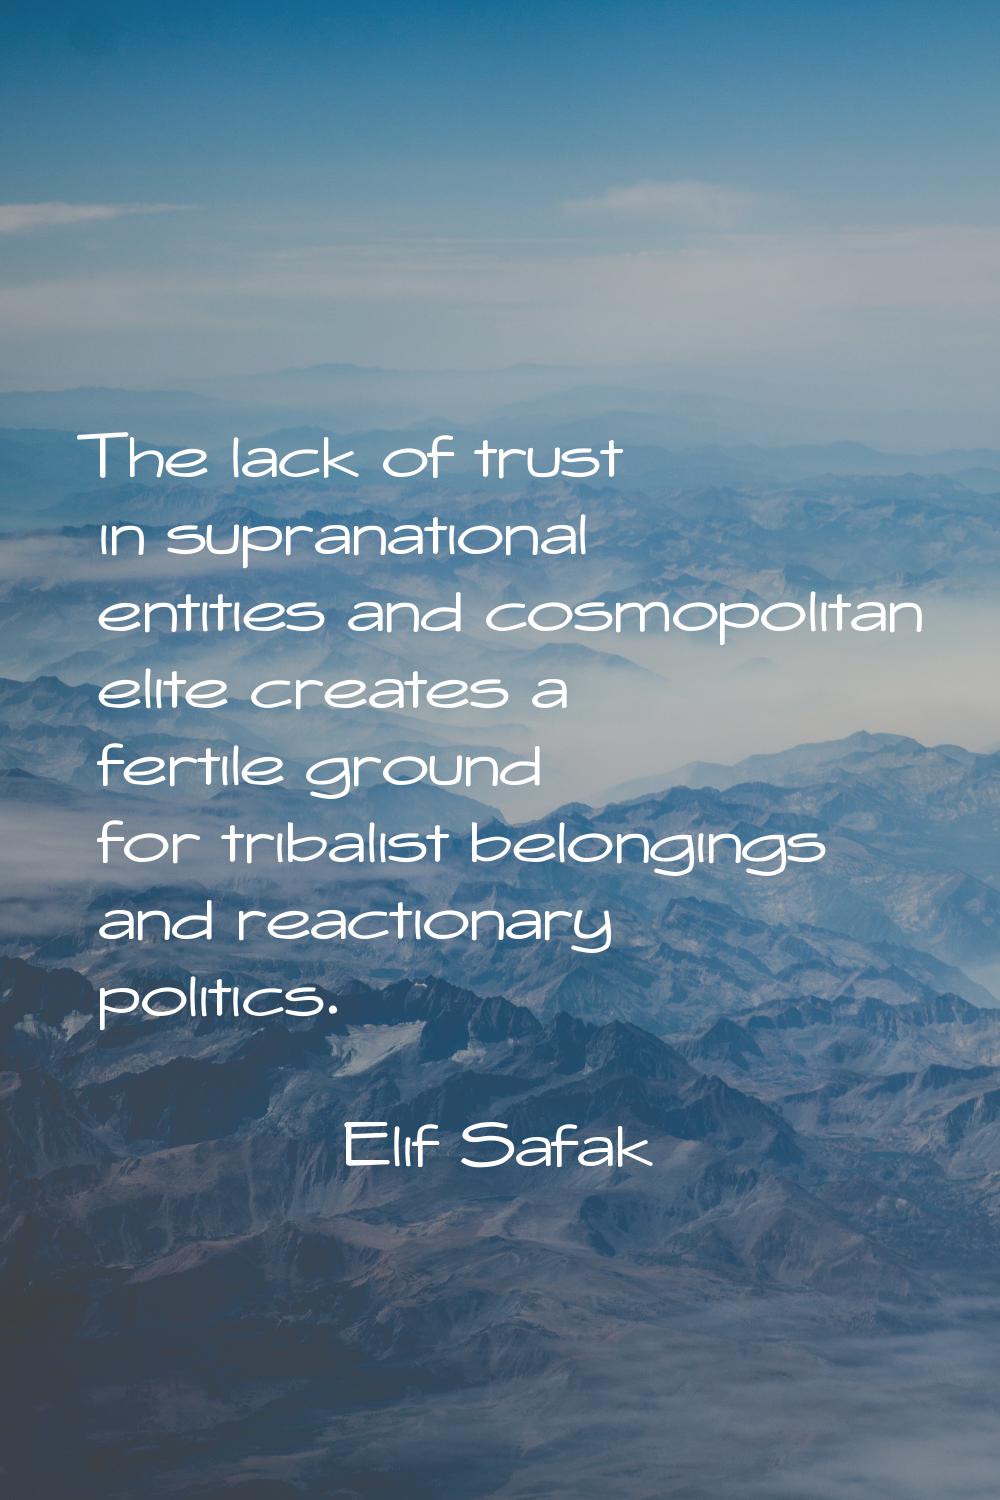 The lack of trust in supranational entities and cosmopolitan elite creates a fertile ground for tri